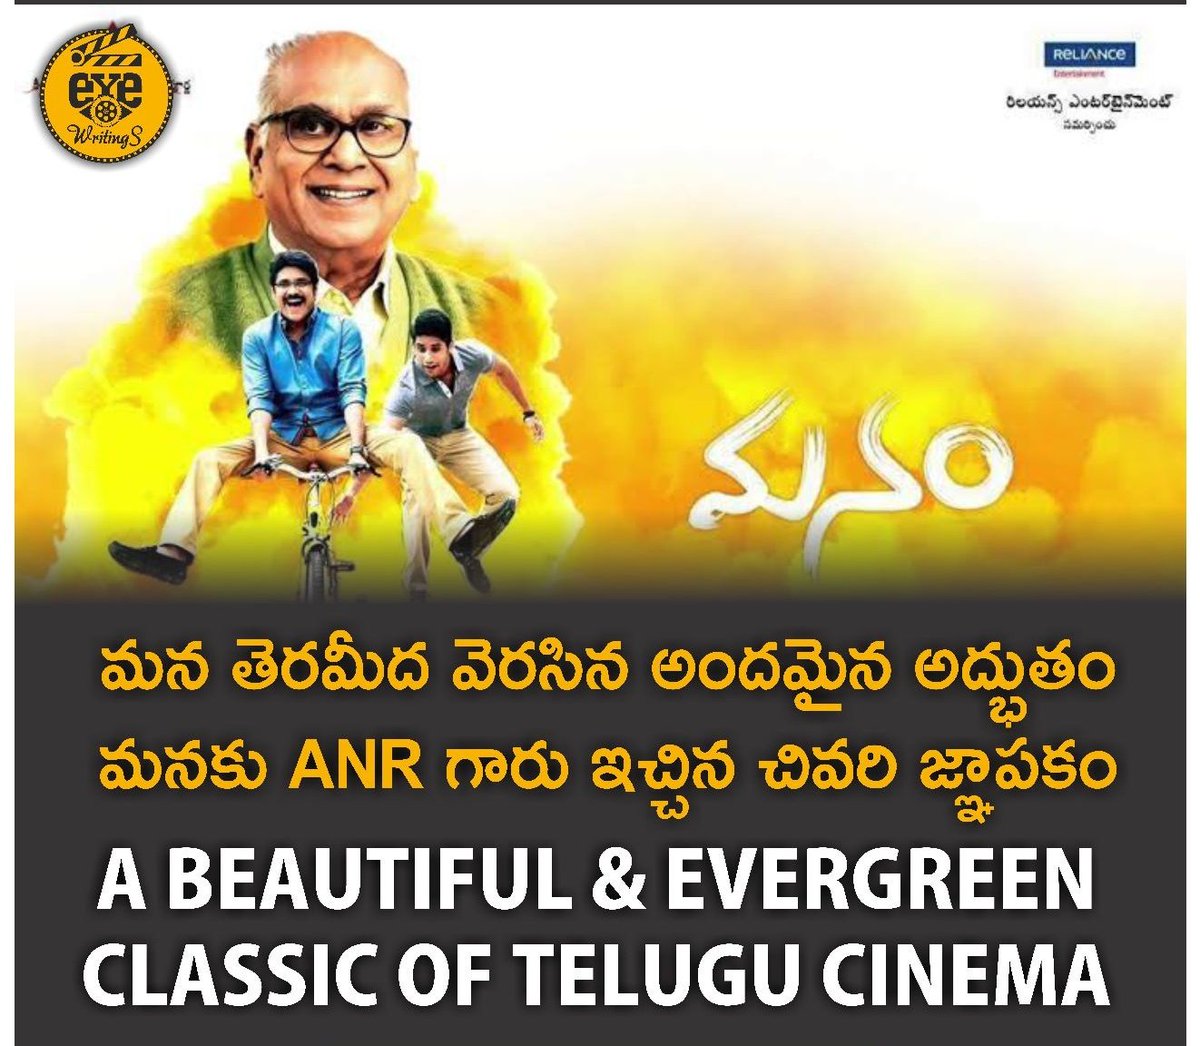 #Manam is re-releasing on May 23rd in limited theaters across AP & TG. Don't miss this chance to relive the magic ✨️❤️

Get ready to experience the masterpiece once again on the big screen 🔥♥️

#Nagarjuna #Nagachaitanya #AkhilAkkineni #ManamReReleaseonMay23rd